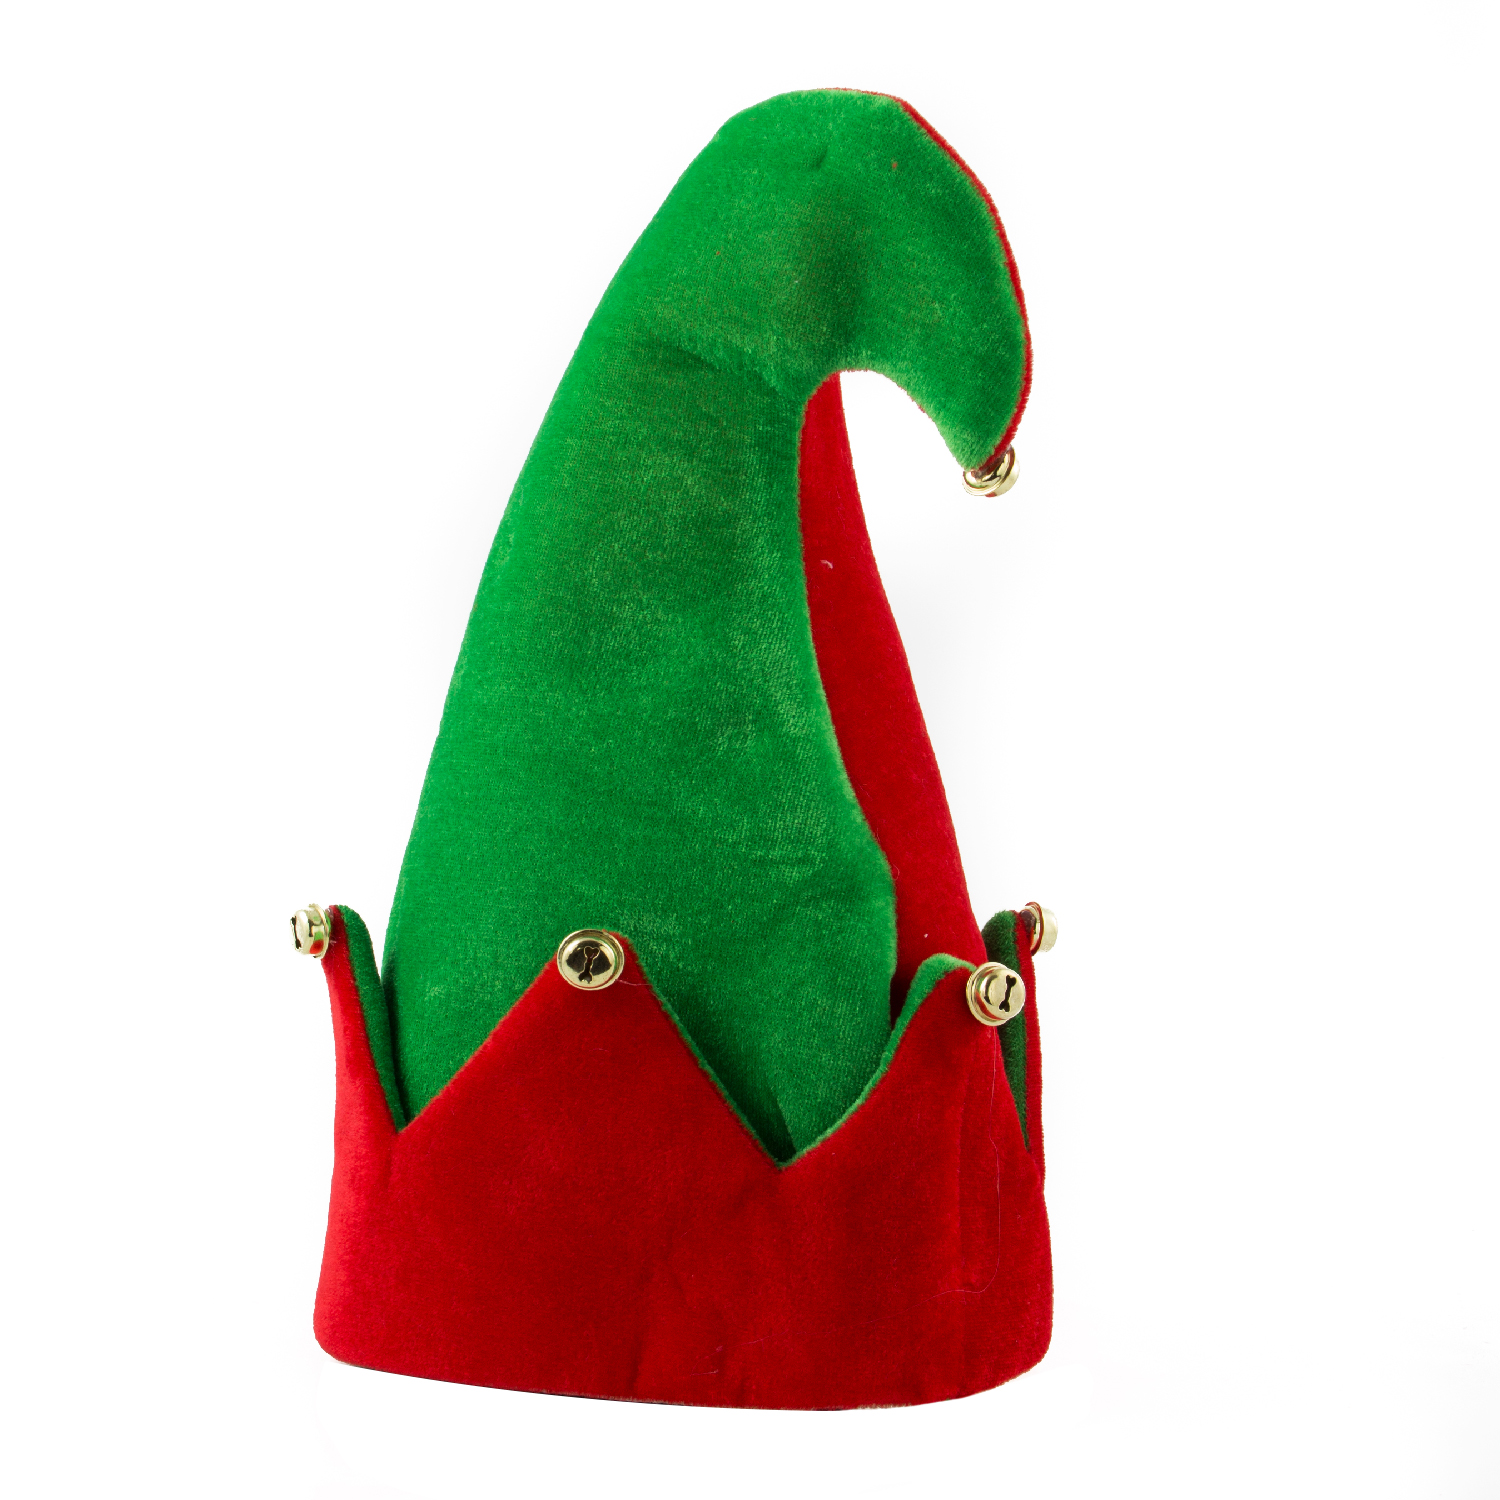 2 Packs Christmas Elf Felt Hat Santa Elf Hats Jingle Bells Xmas for Holiday Party Costume Accessories Favors Gifts 